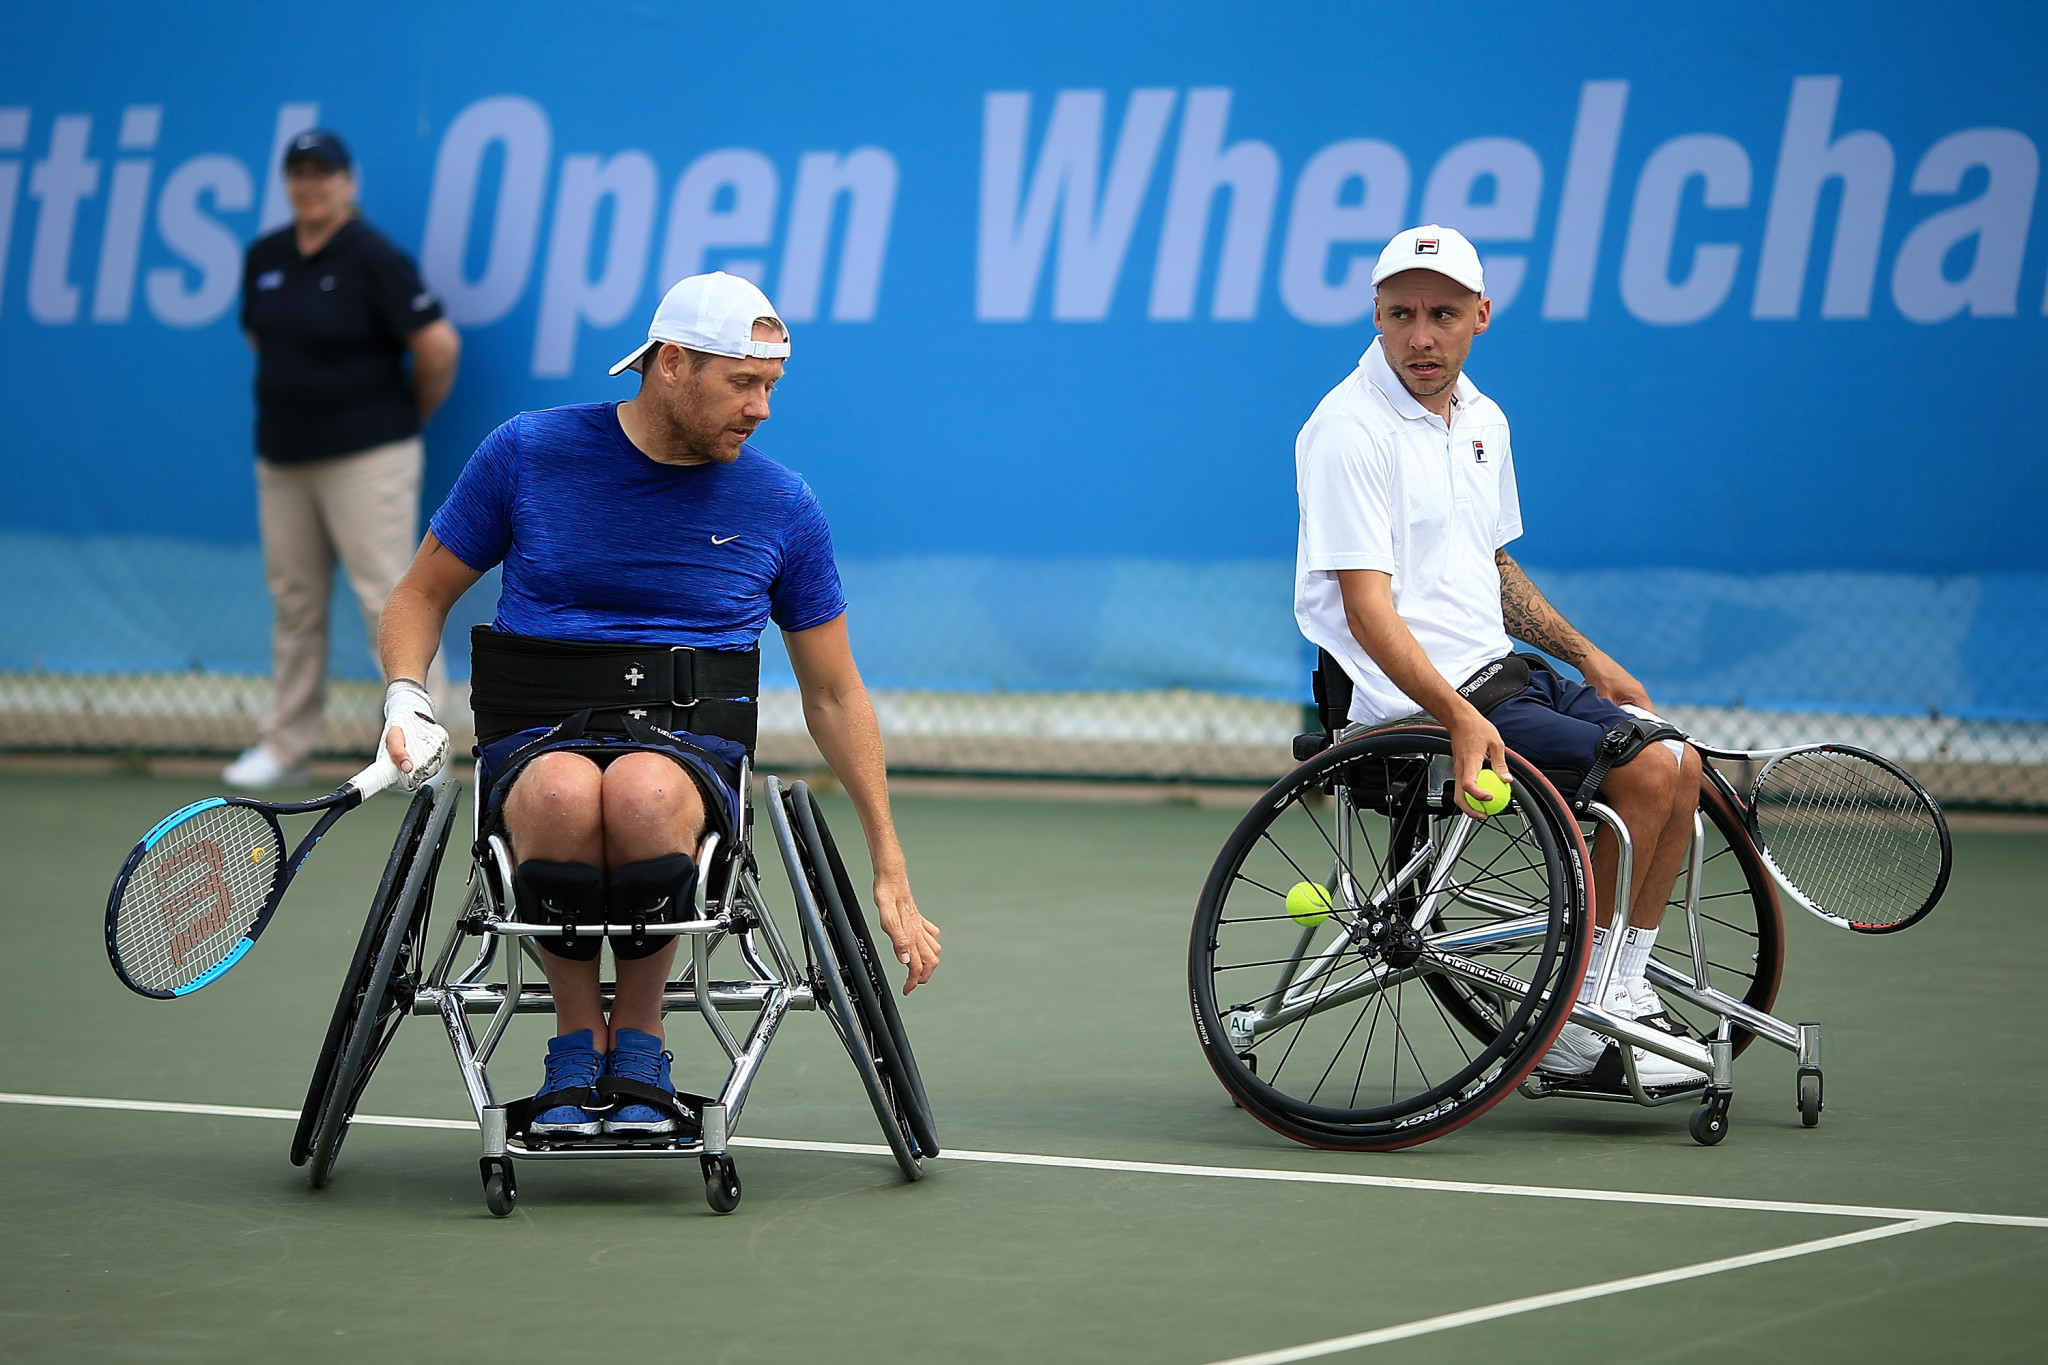 British pair Antony Cotterill and Andy Lapthorne are looking to qualify for the finals of the Wheelchair Doubles Masters in Bemmel to avenge their silver medals from last year ©Getty Images